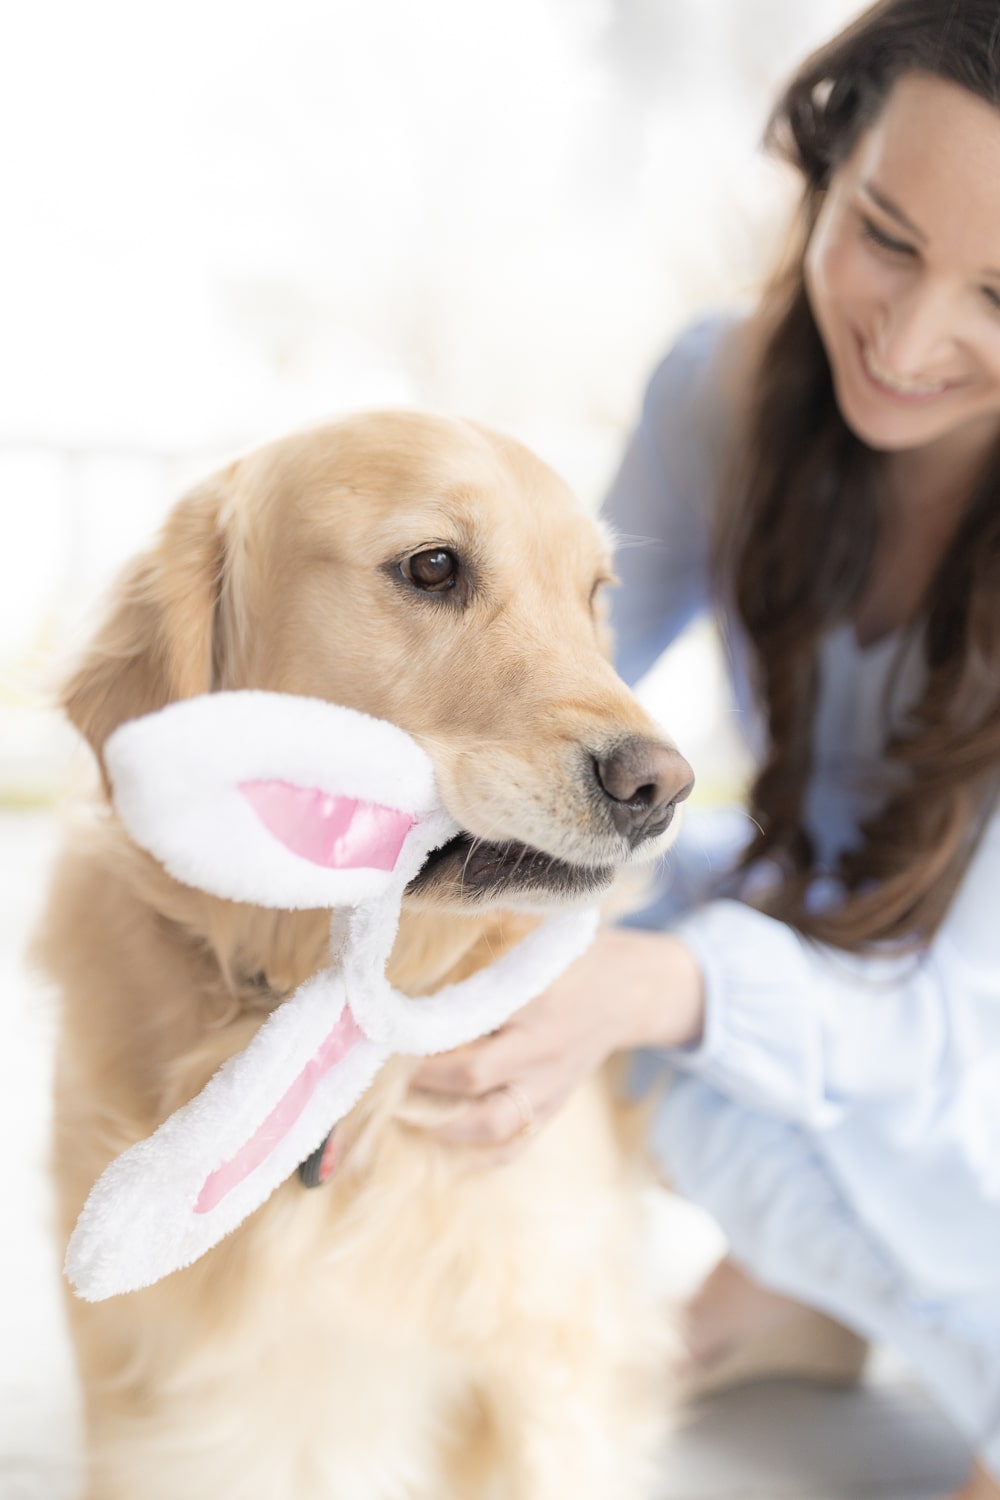 Easter basket filler ideas for dogs rounded up by blogger Stephanie Ziajka on Diary of a Debutante